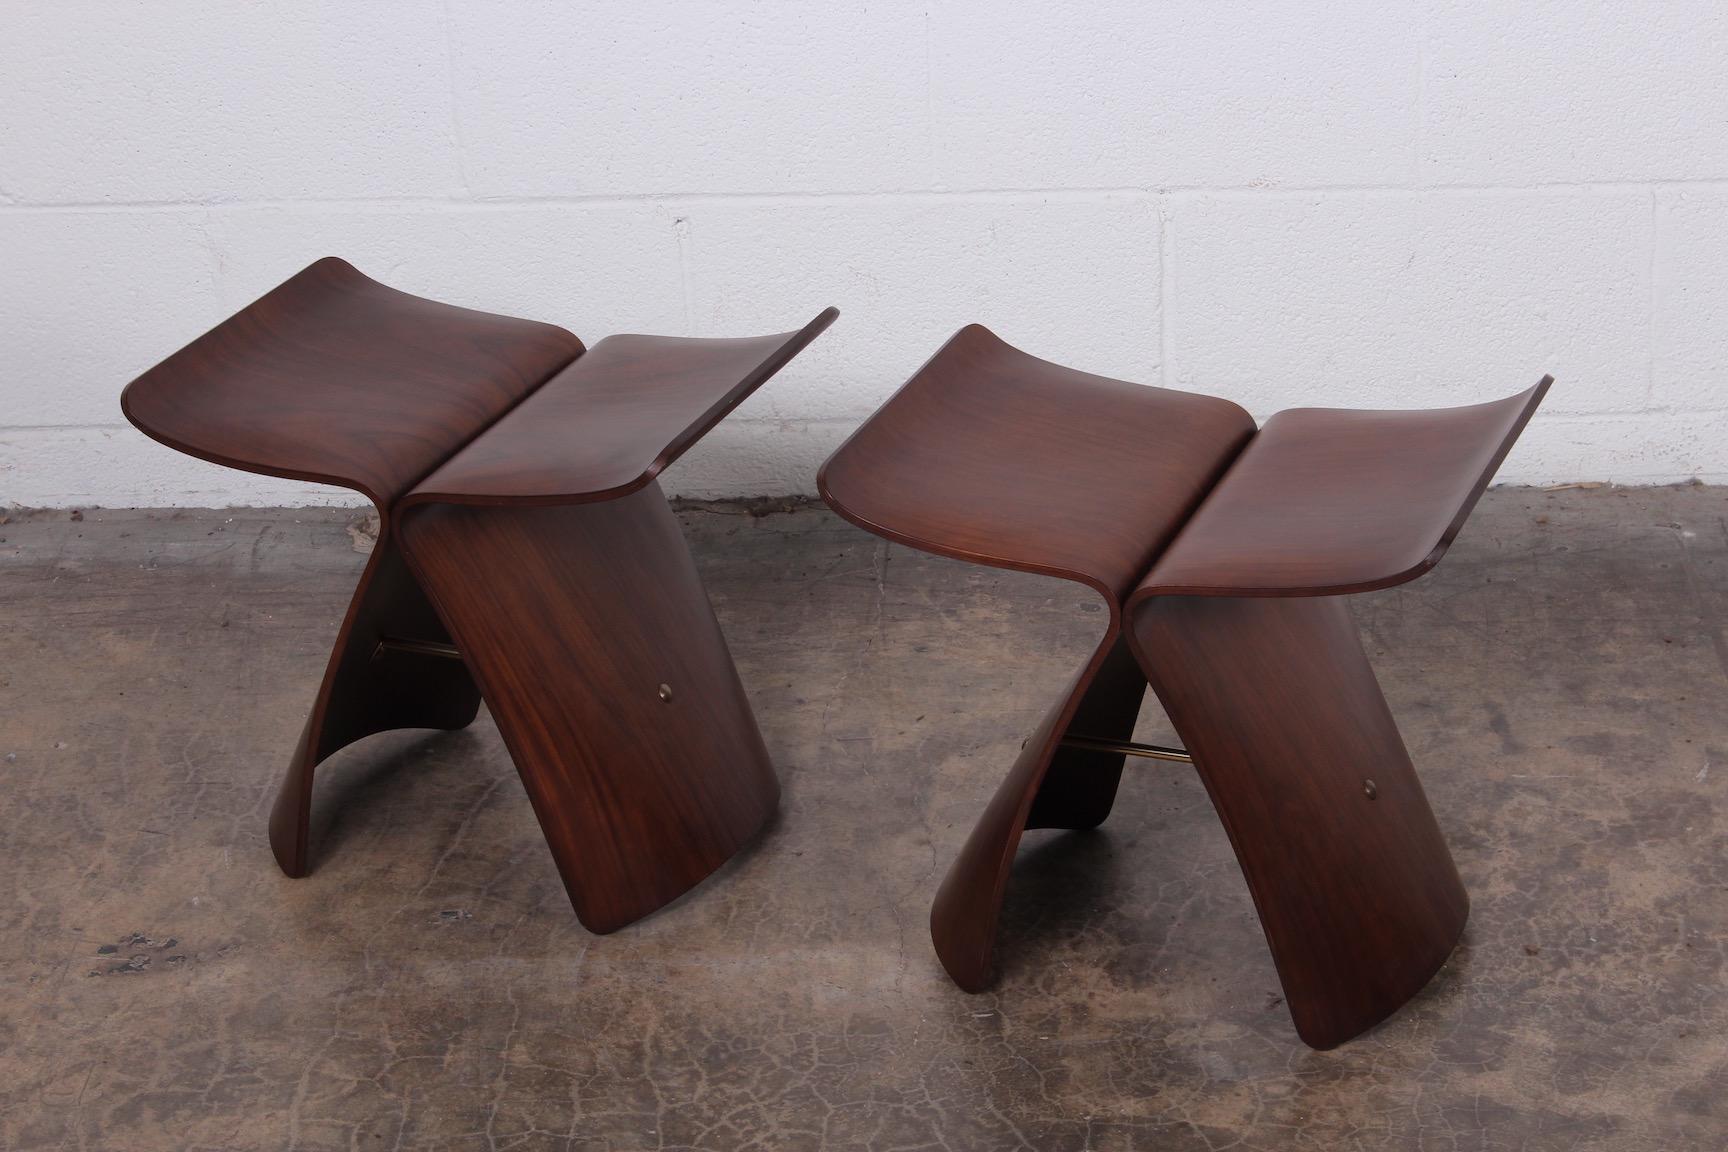 A pair of rosewood butterfly stools designed by Sori Yanagi.